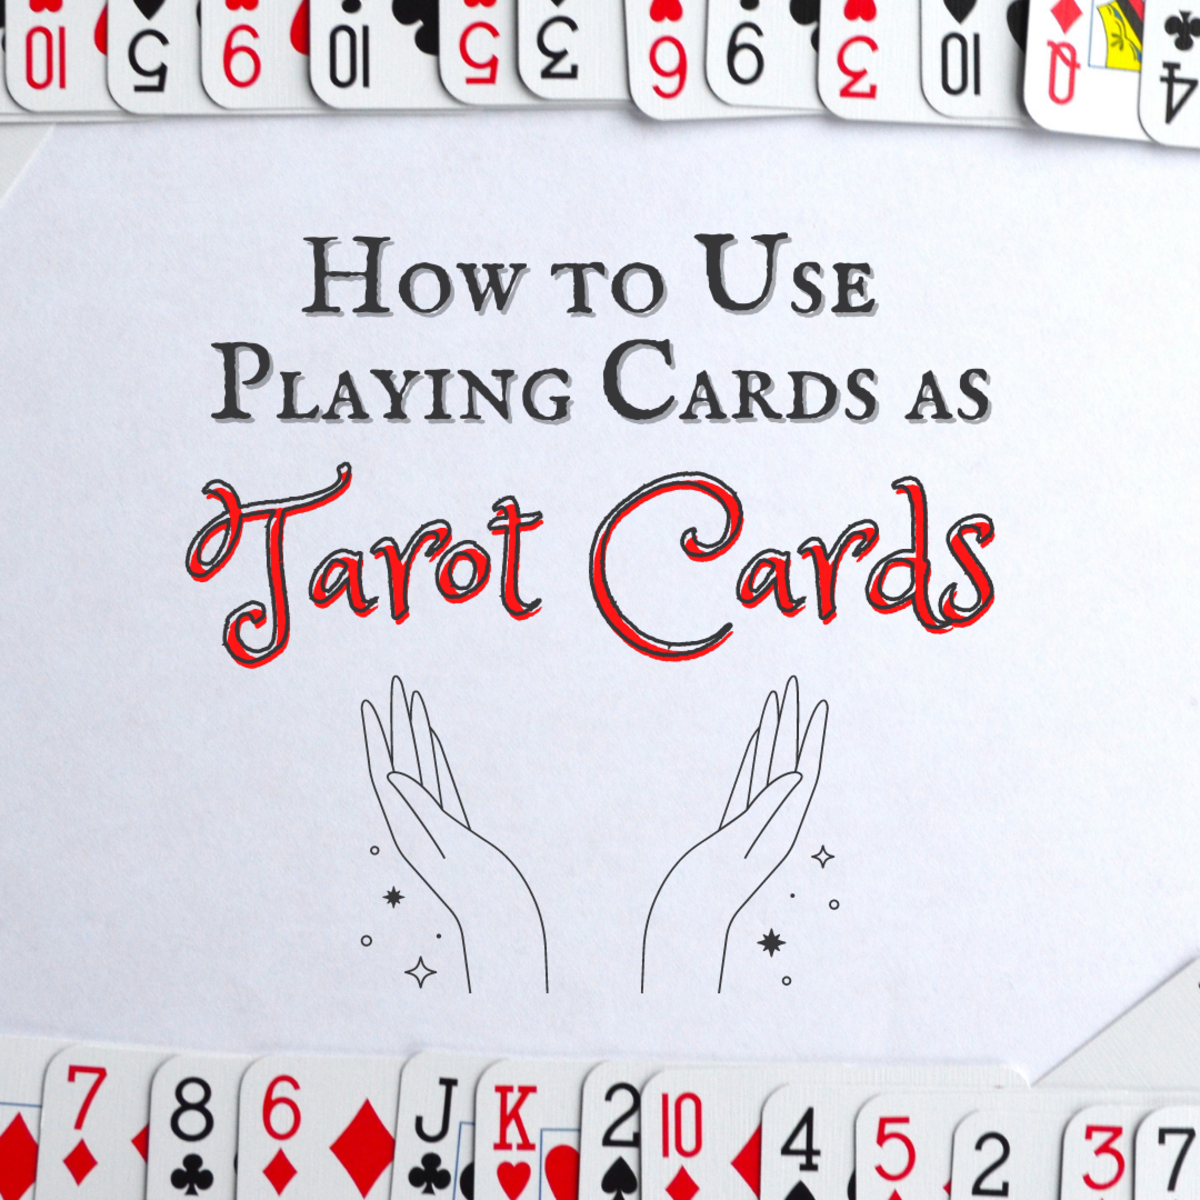 How to Make Tarot Cards Out of Playing Cards